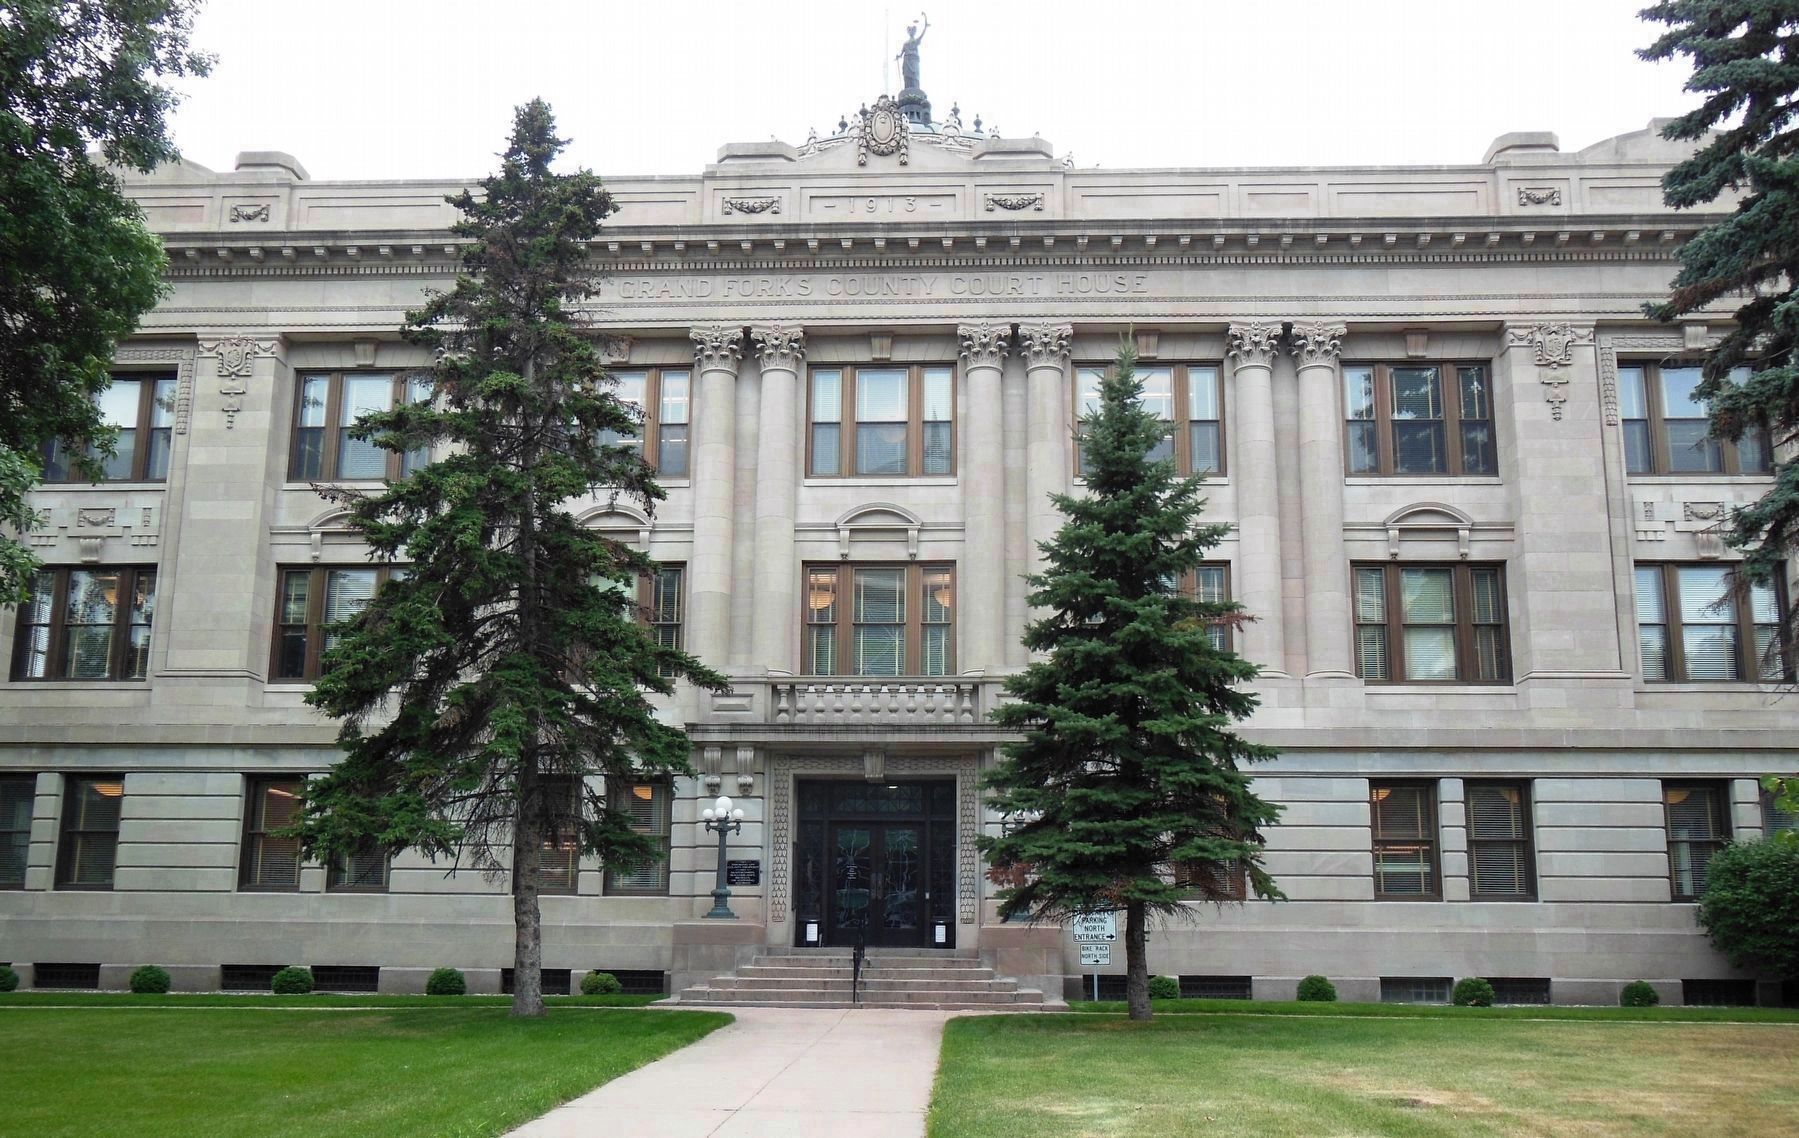 Grand Forks County Courthouse (<i>South 4th Street elevation</i>) image. Click for full size.